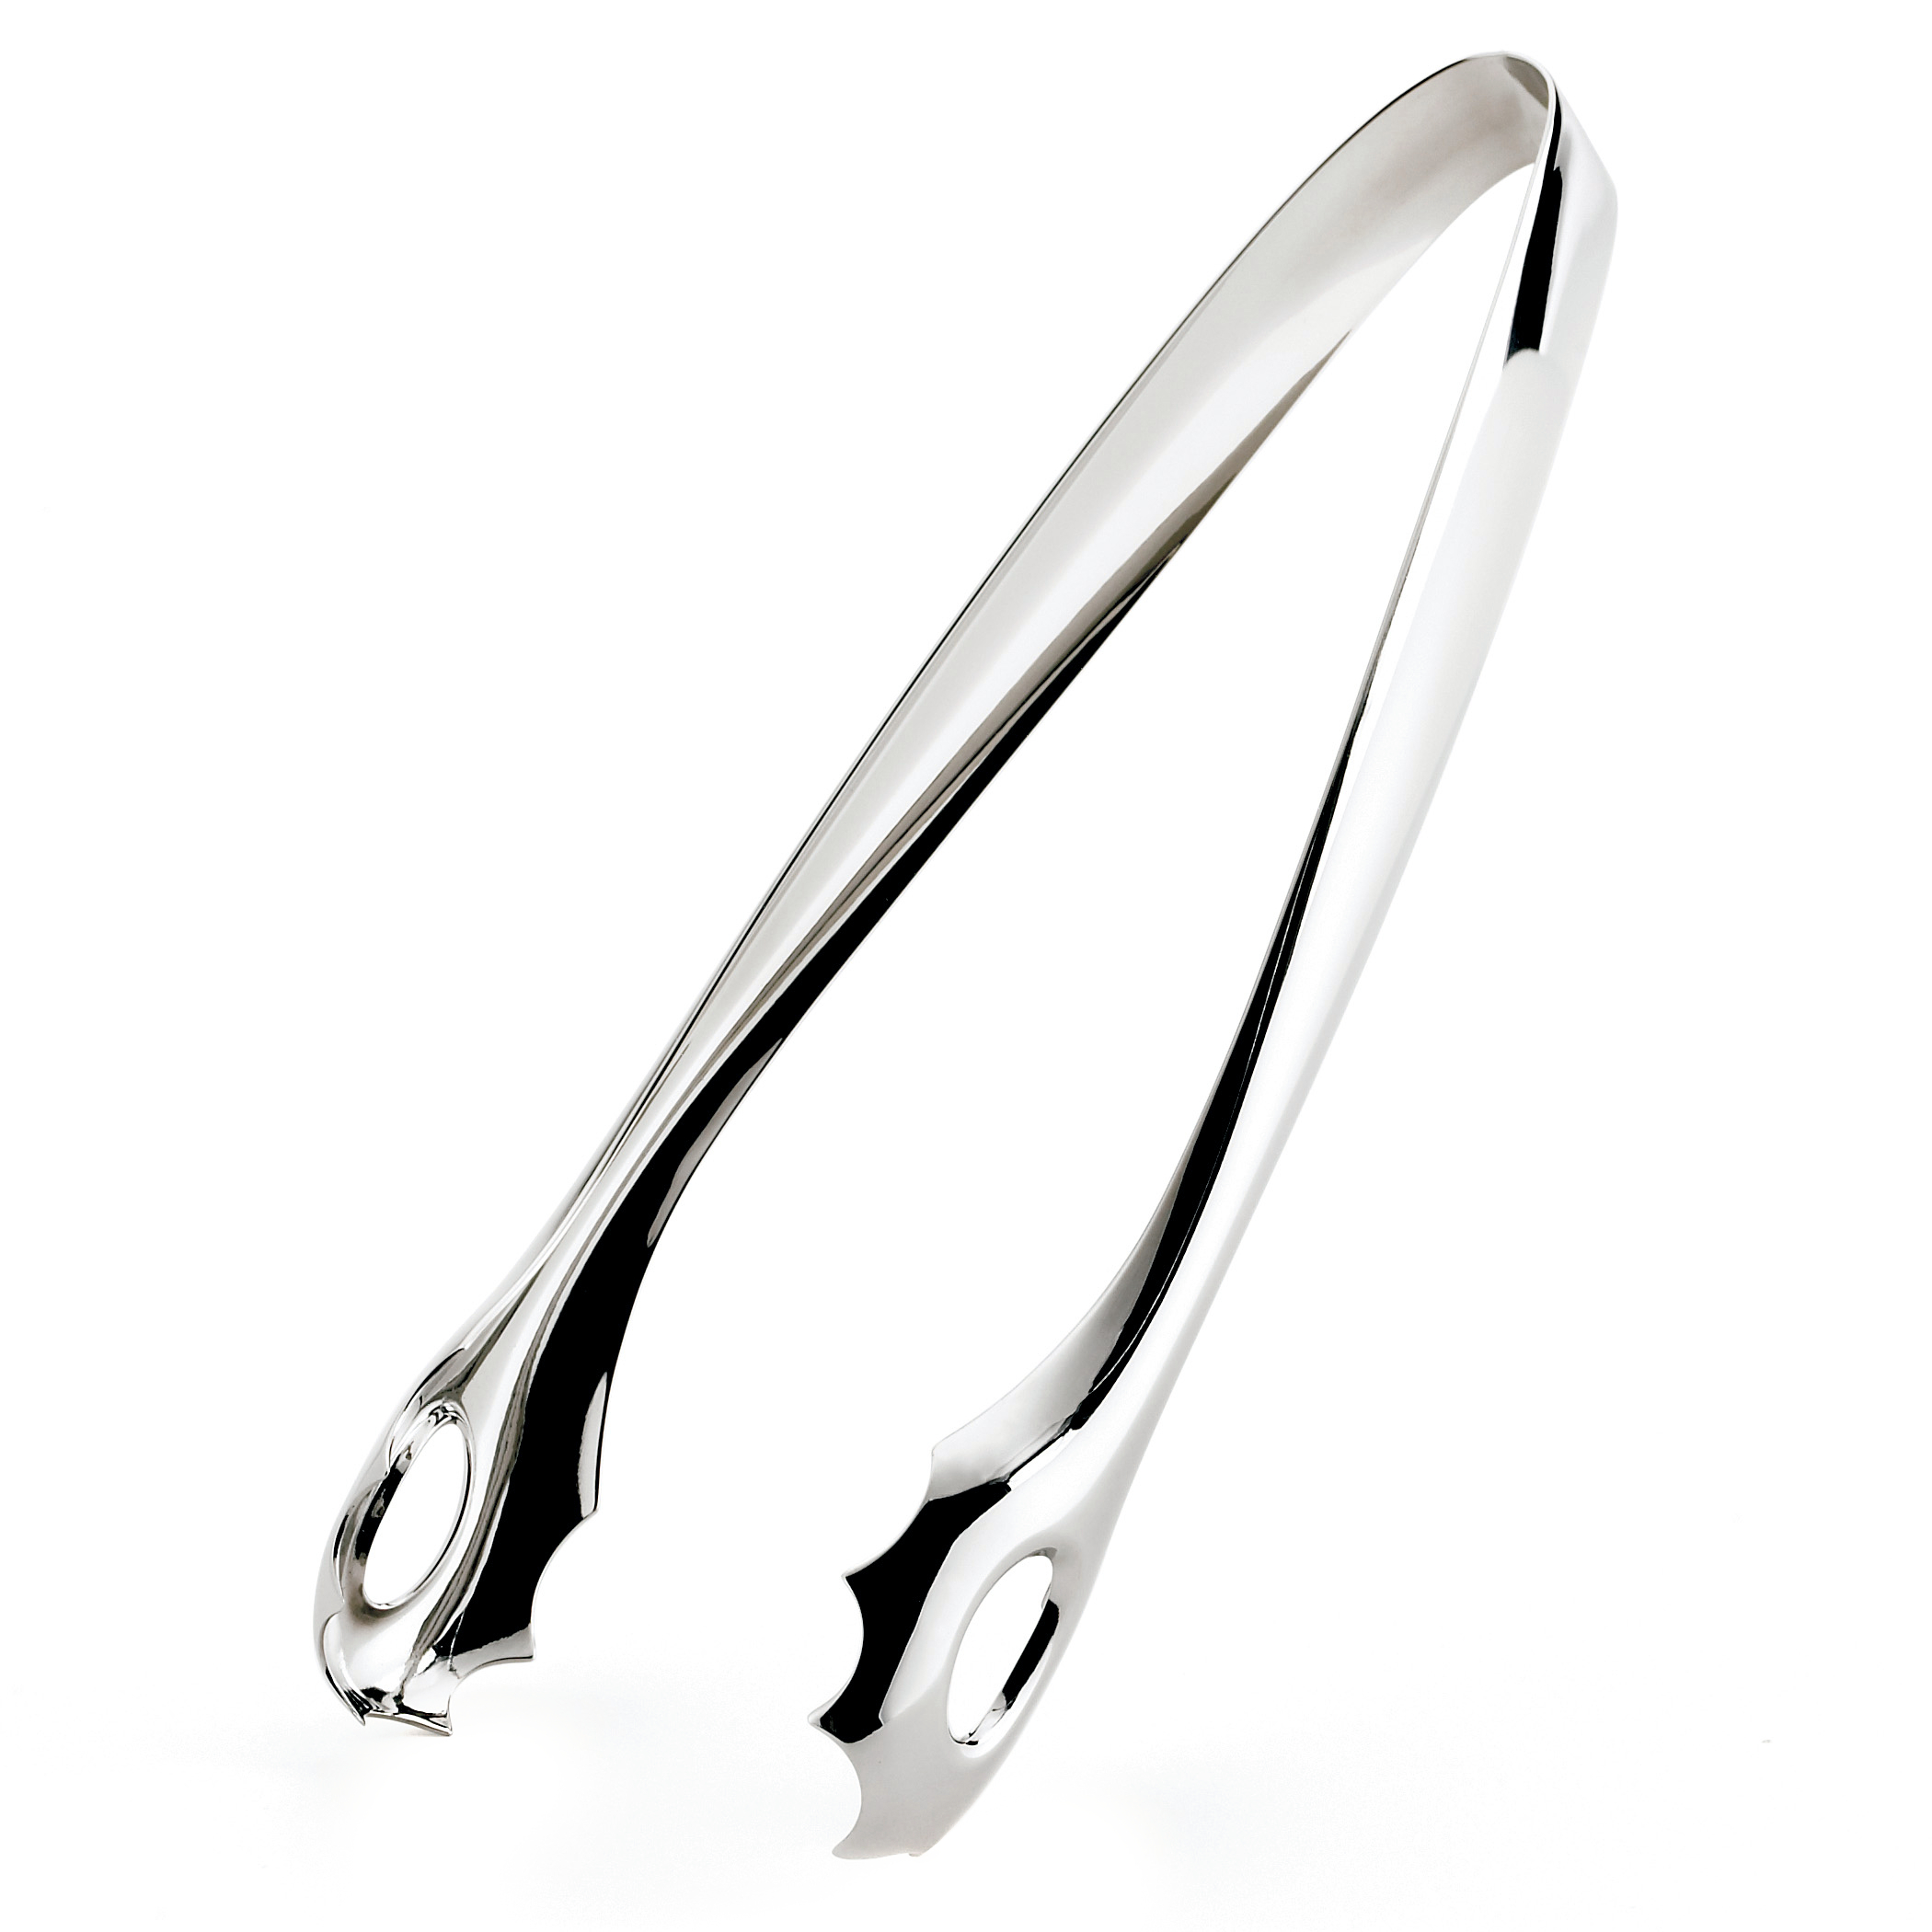 Cuisipro Stainless Steel 7 Inch Ice Tongs - image 1 of 2